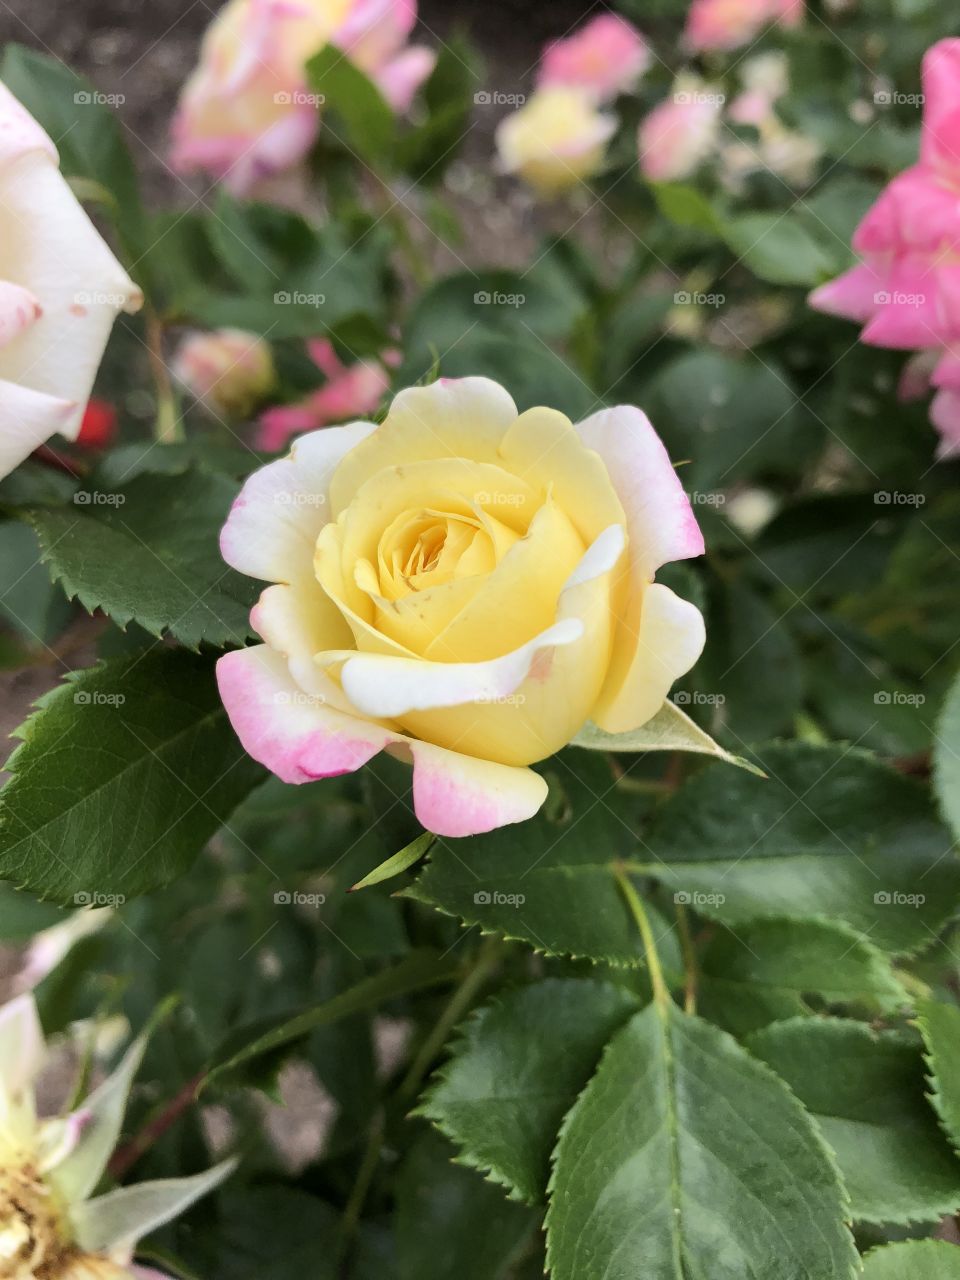 A stunning pink and yellow shaded rose. Picture taken at the rose garden at Colonial Park in Somerset, NJ. 